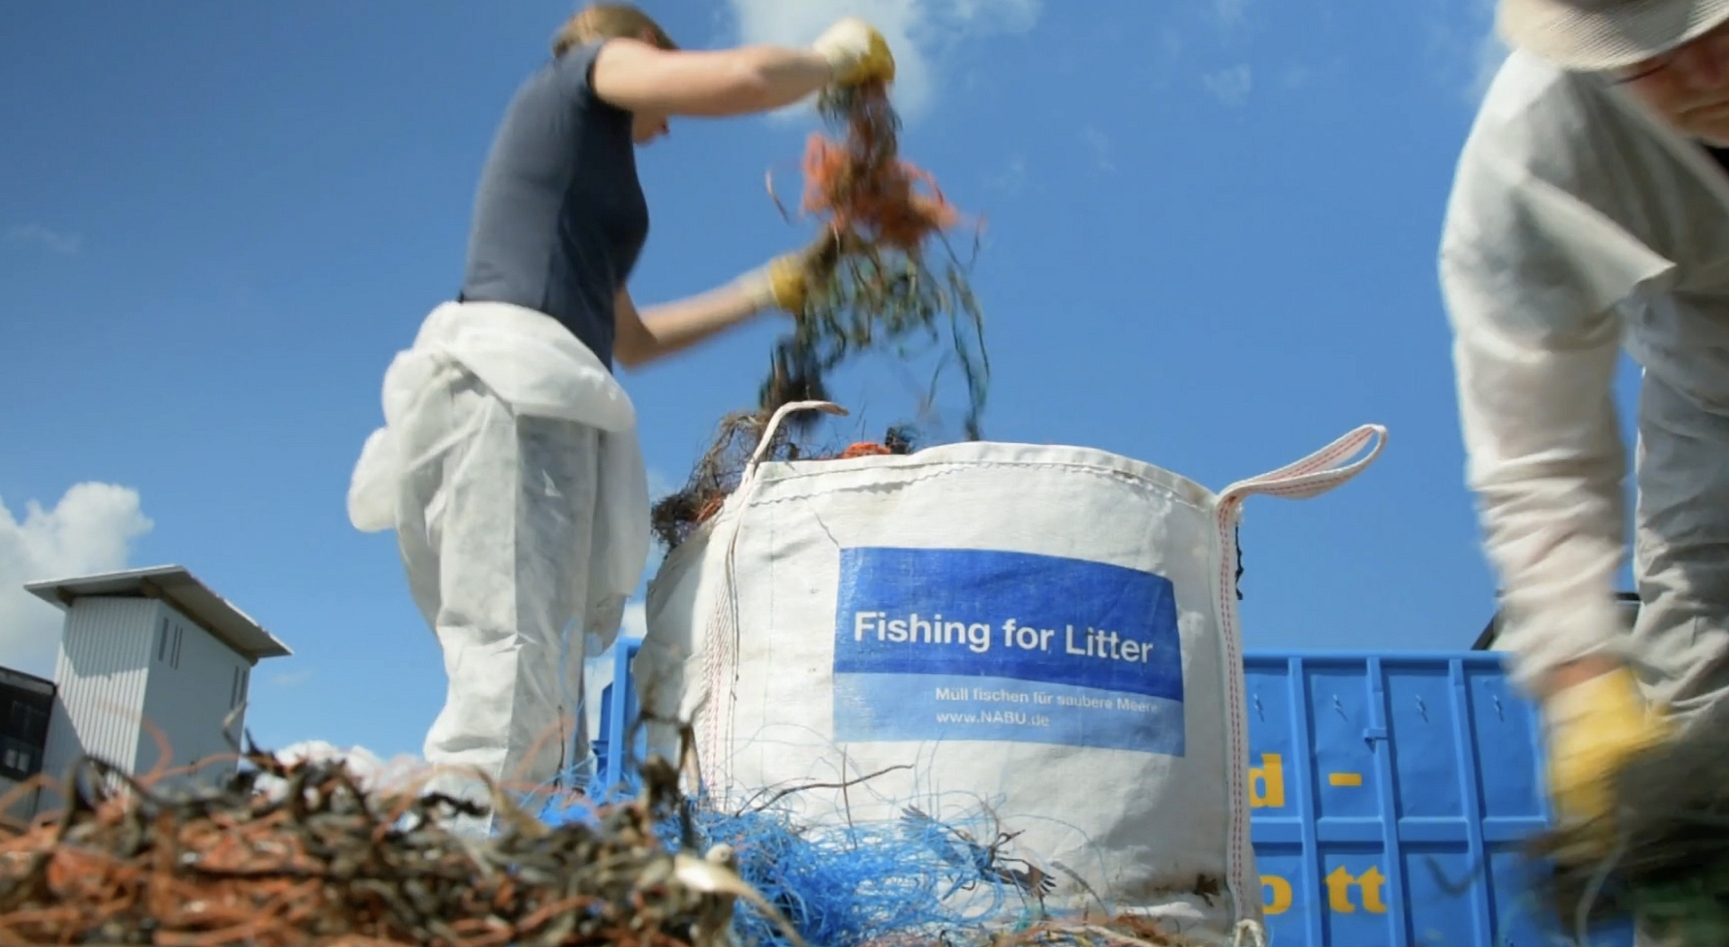 Undertaking fishing waste with an app